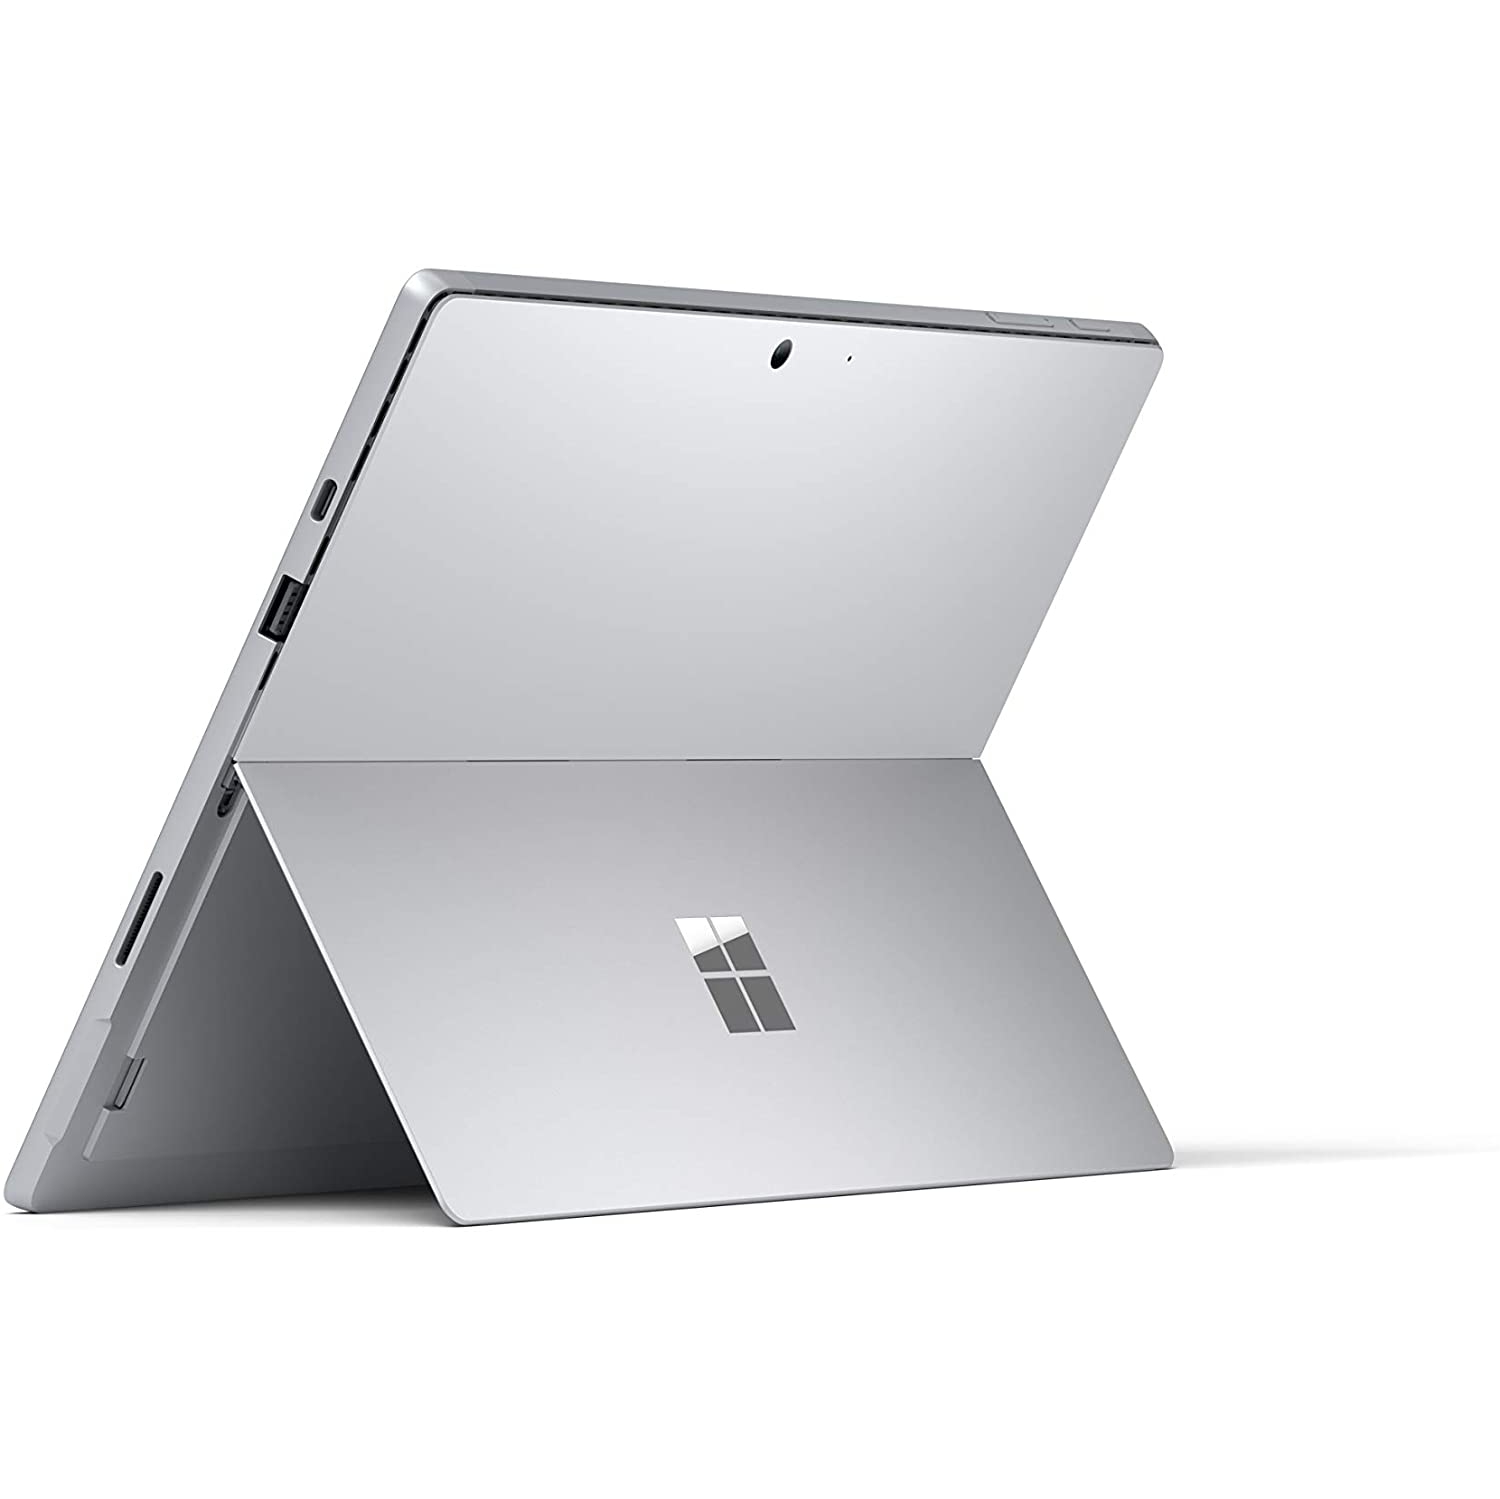 Refurbished (Excellent) - Microsoft Surface Pro 7 12.3